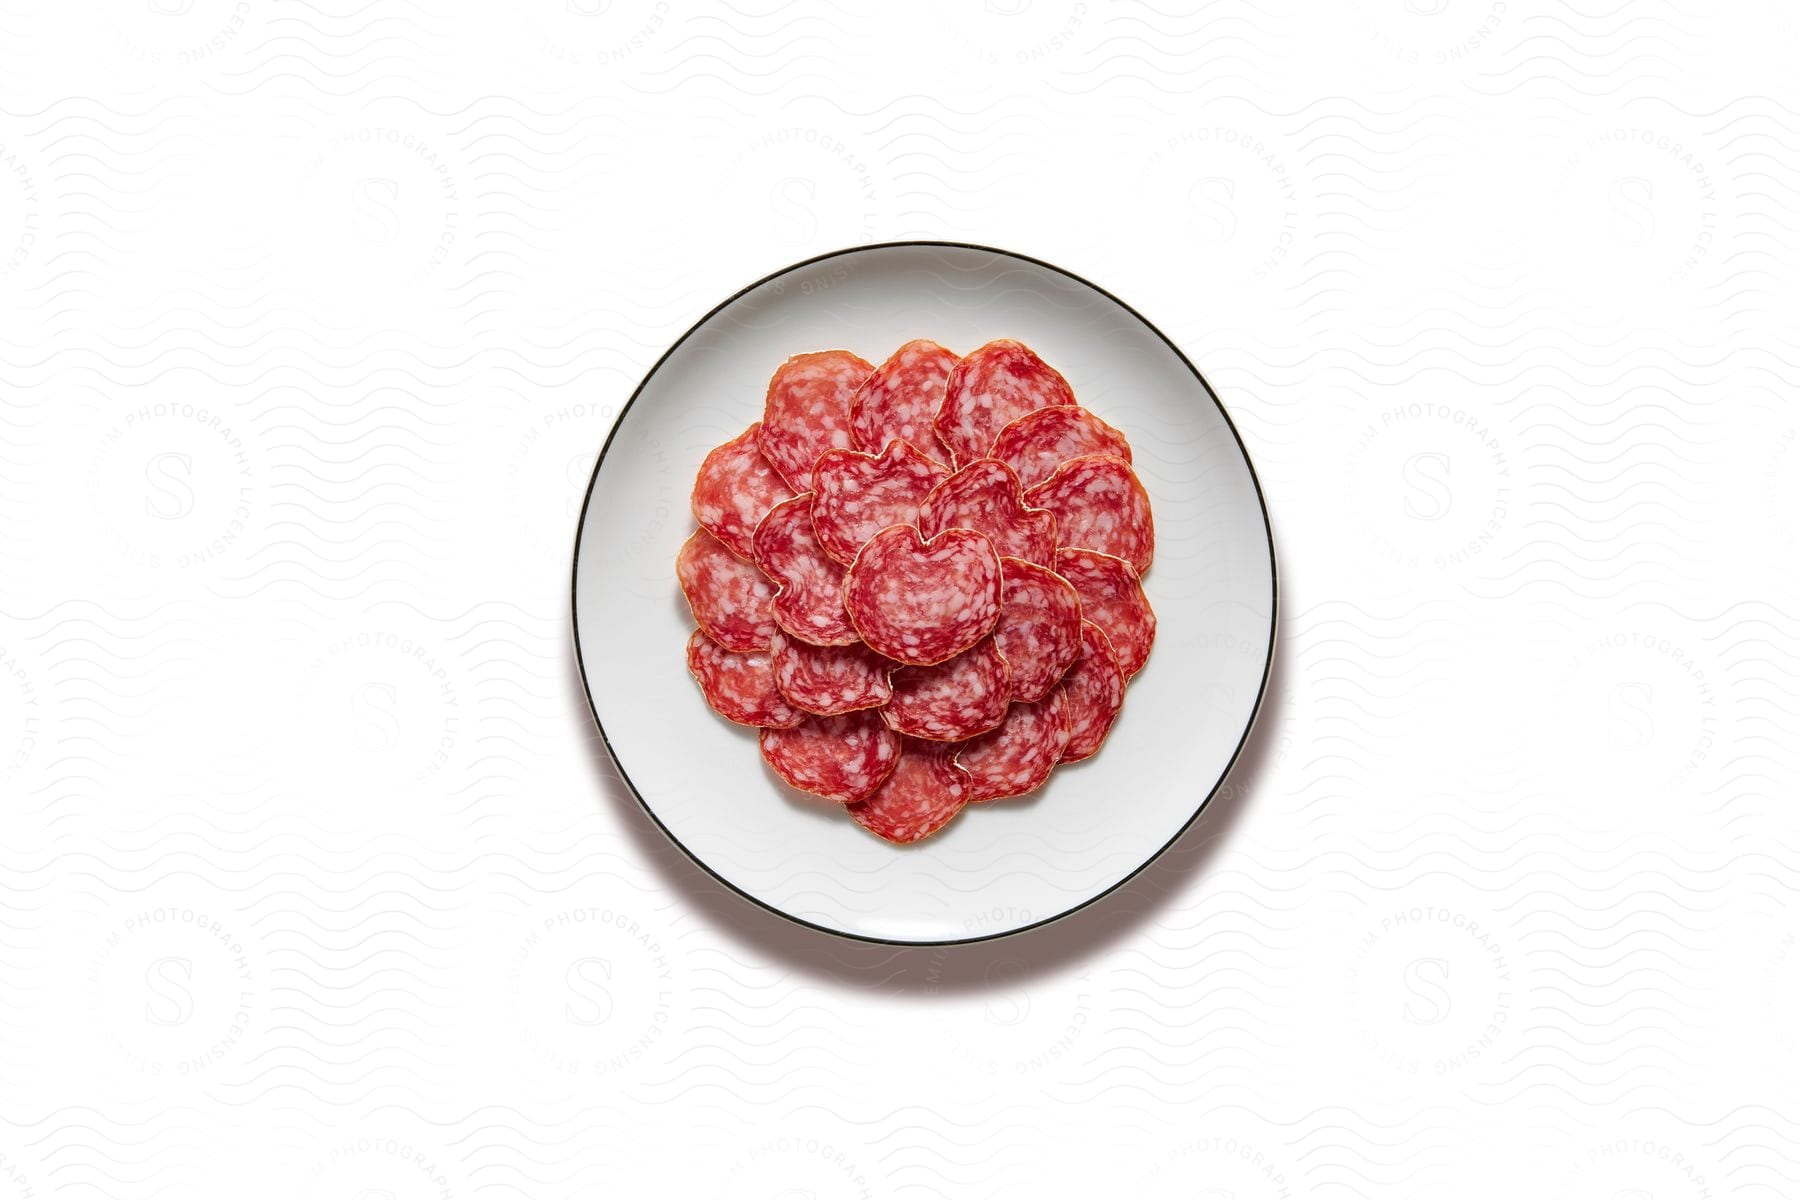 Spanish salami on a white plate placed on a white surface